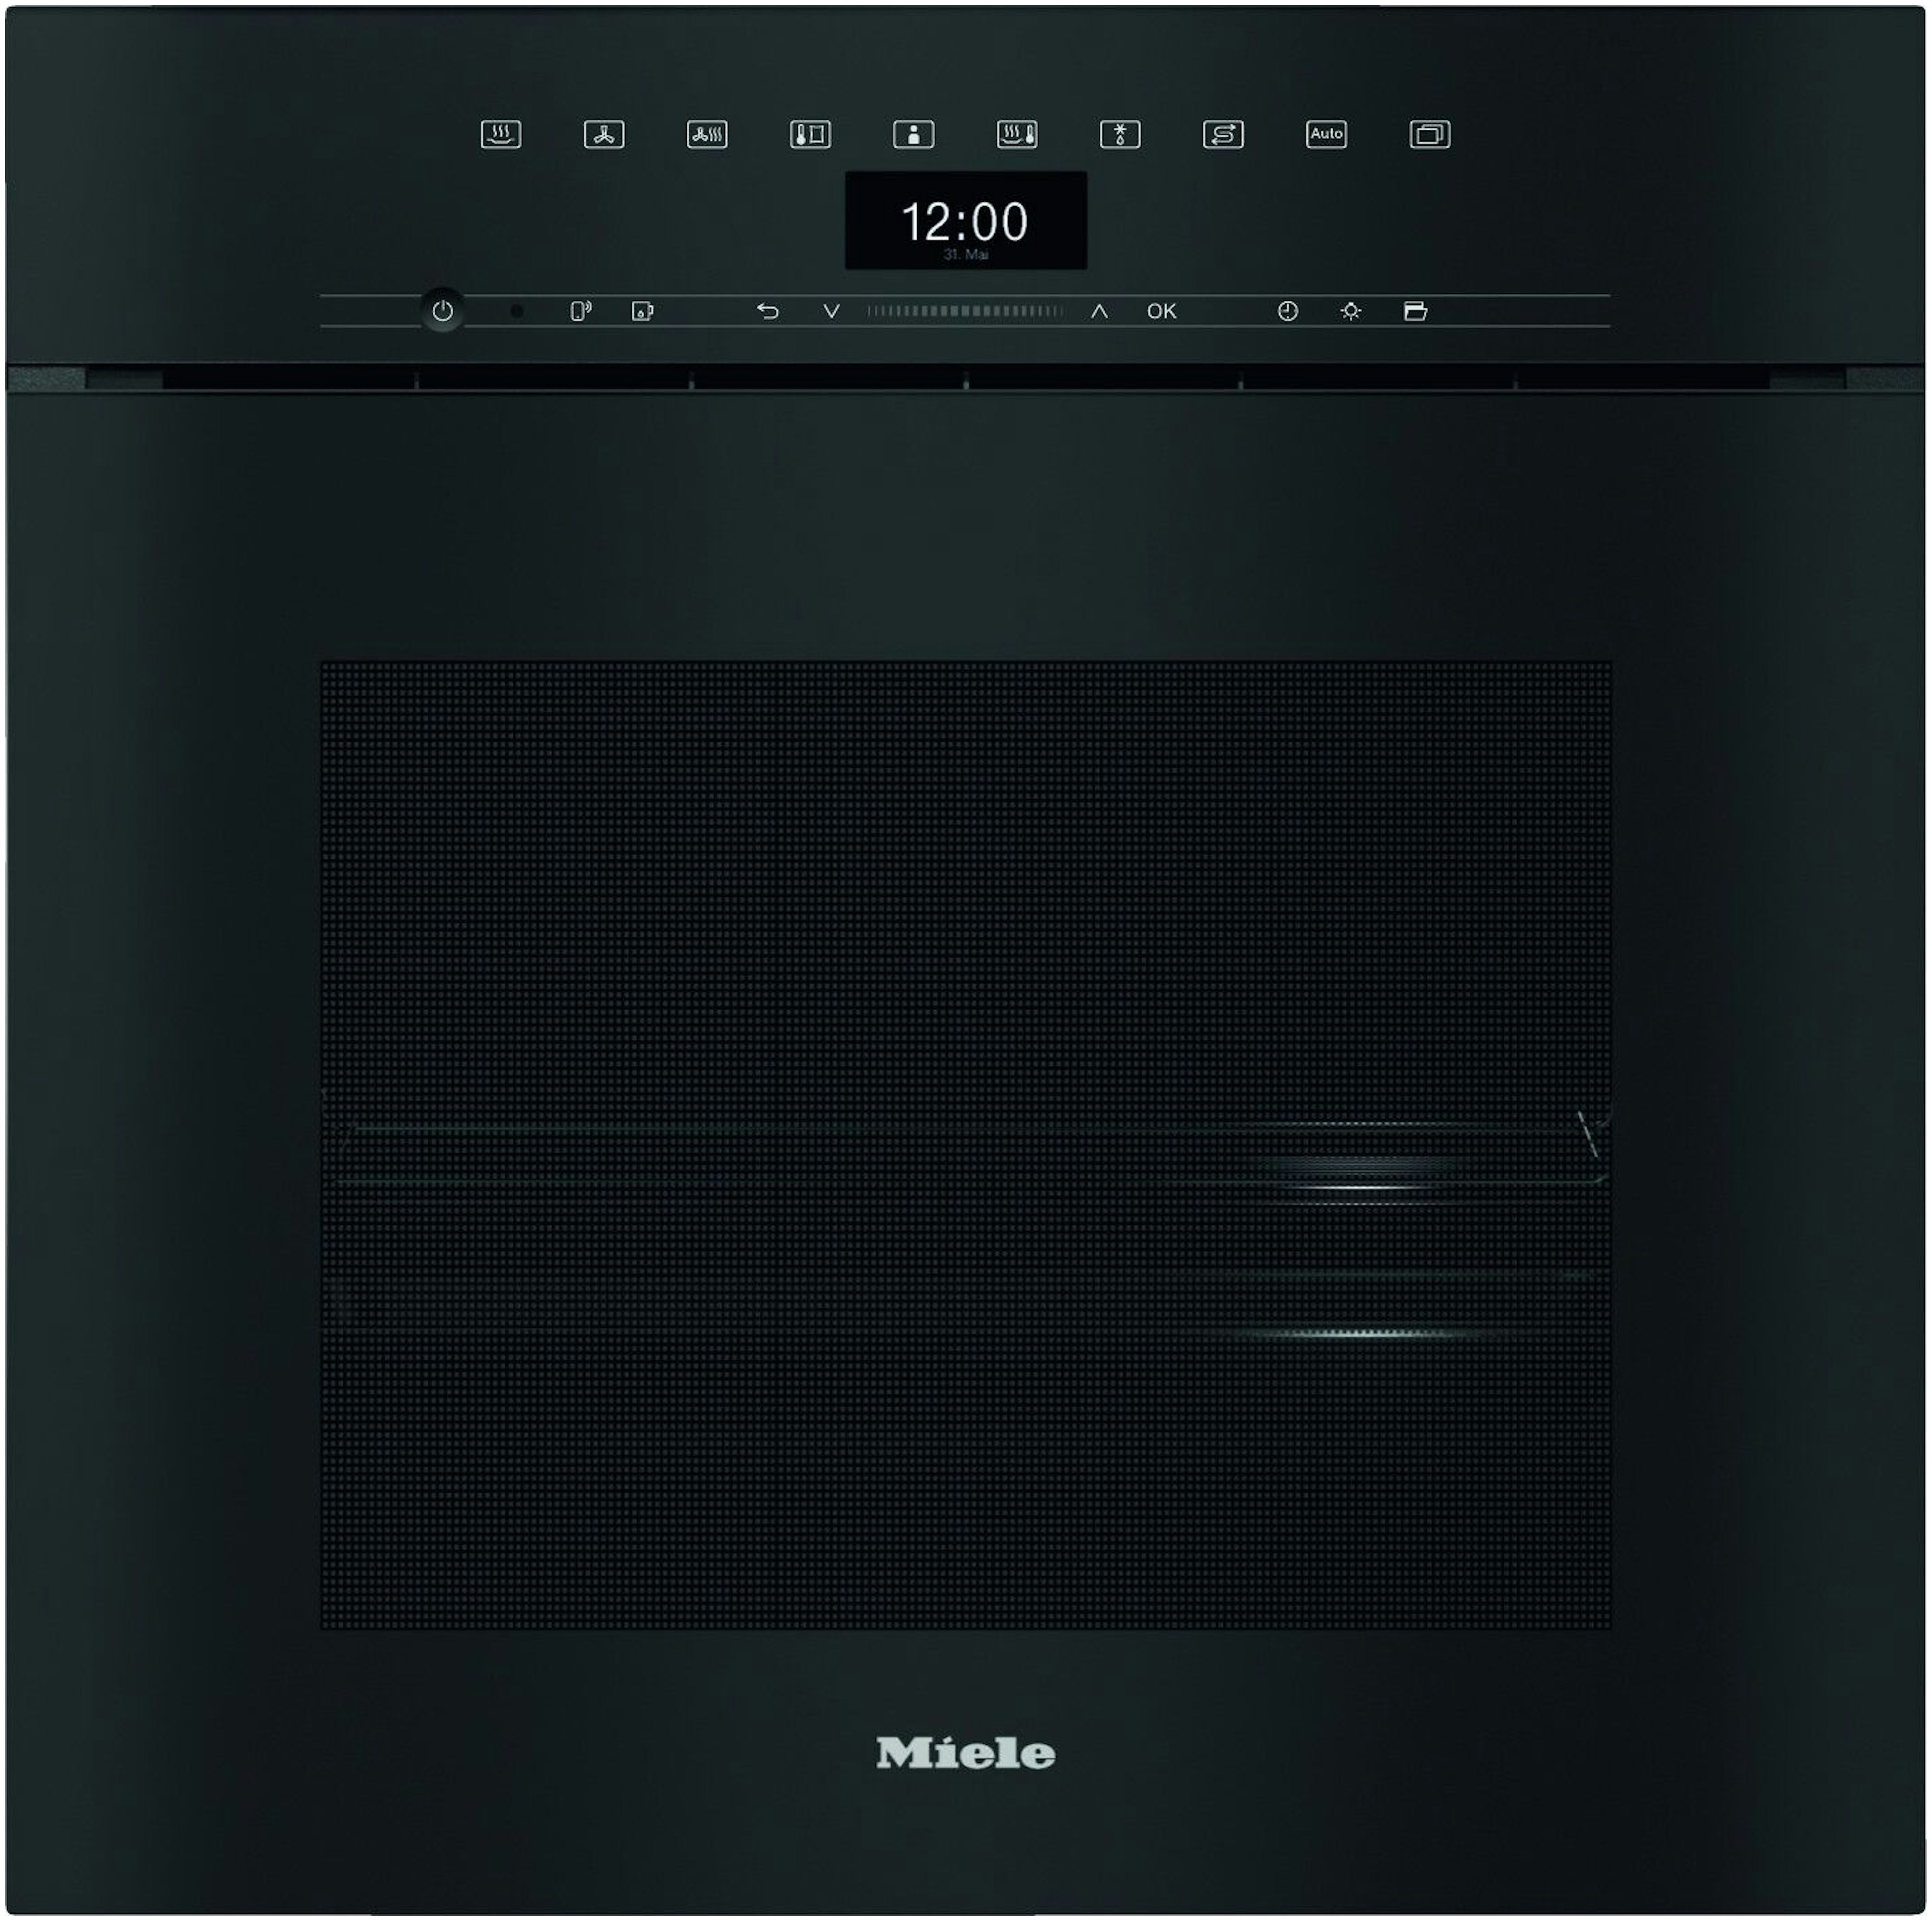 Miele DGC7460HCXPROOBSW